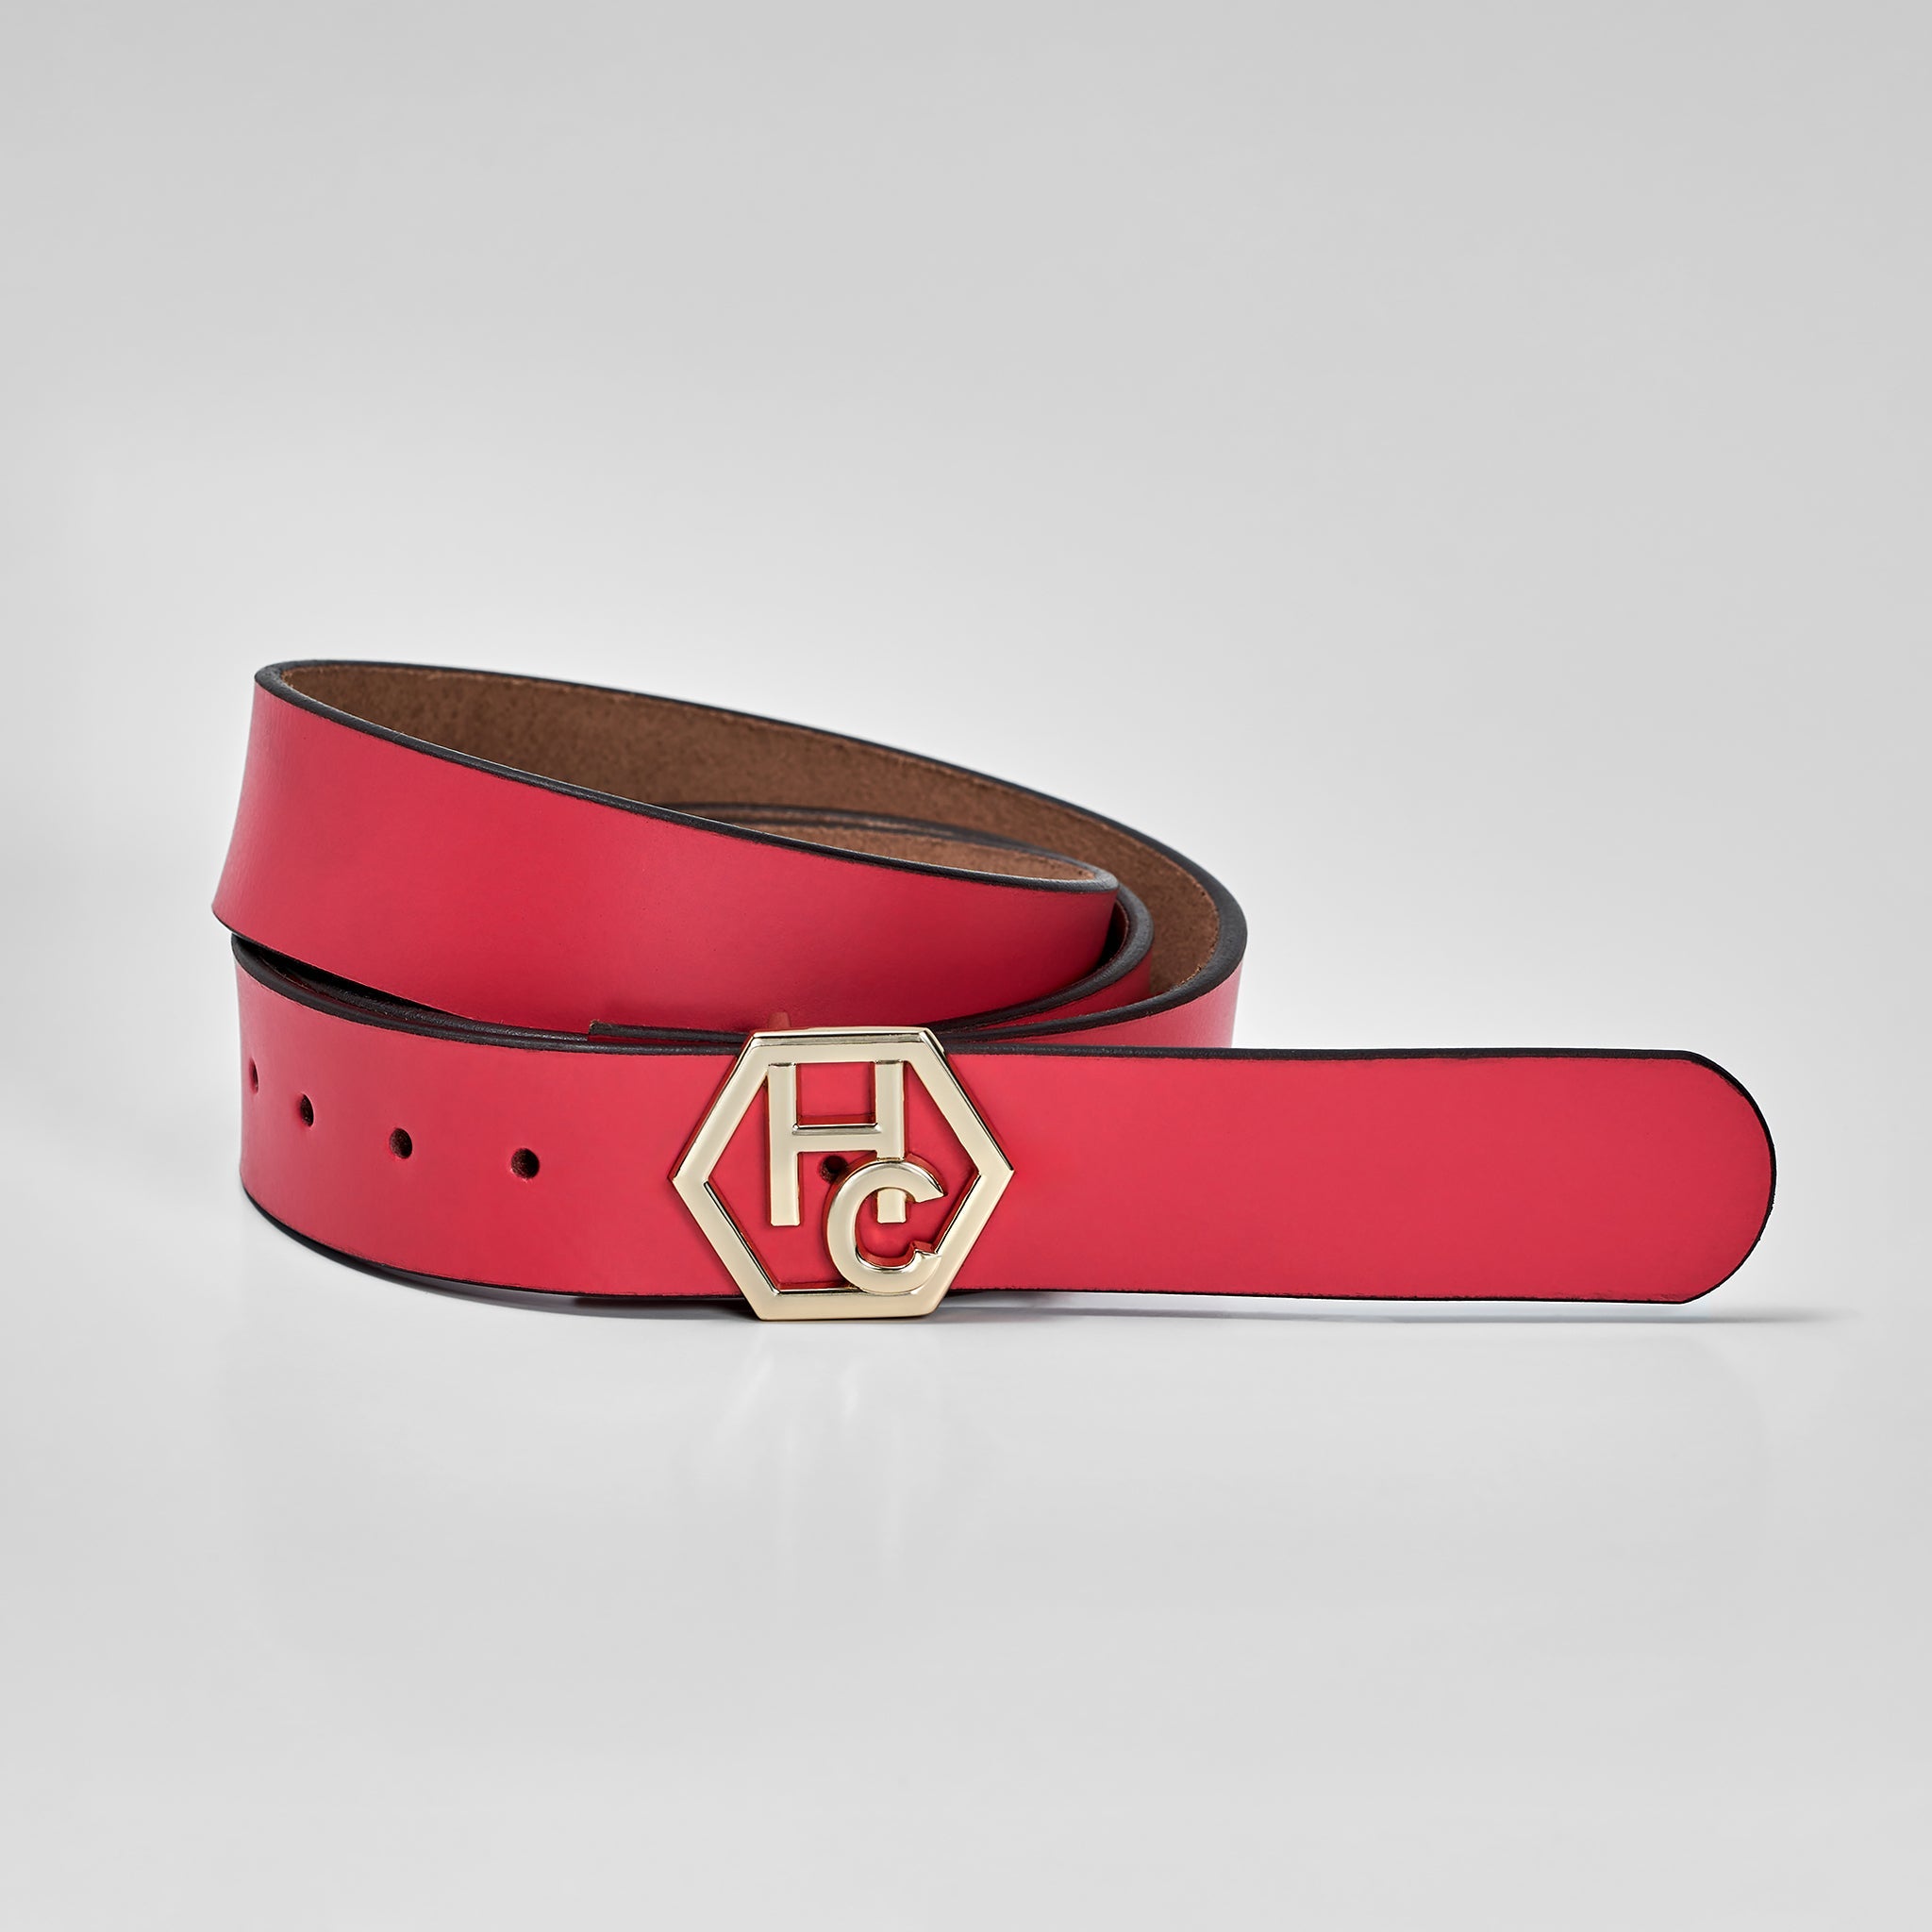 Hedonist Chicago Seamless Pink Red Leather Belt 1" 32381344284823